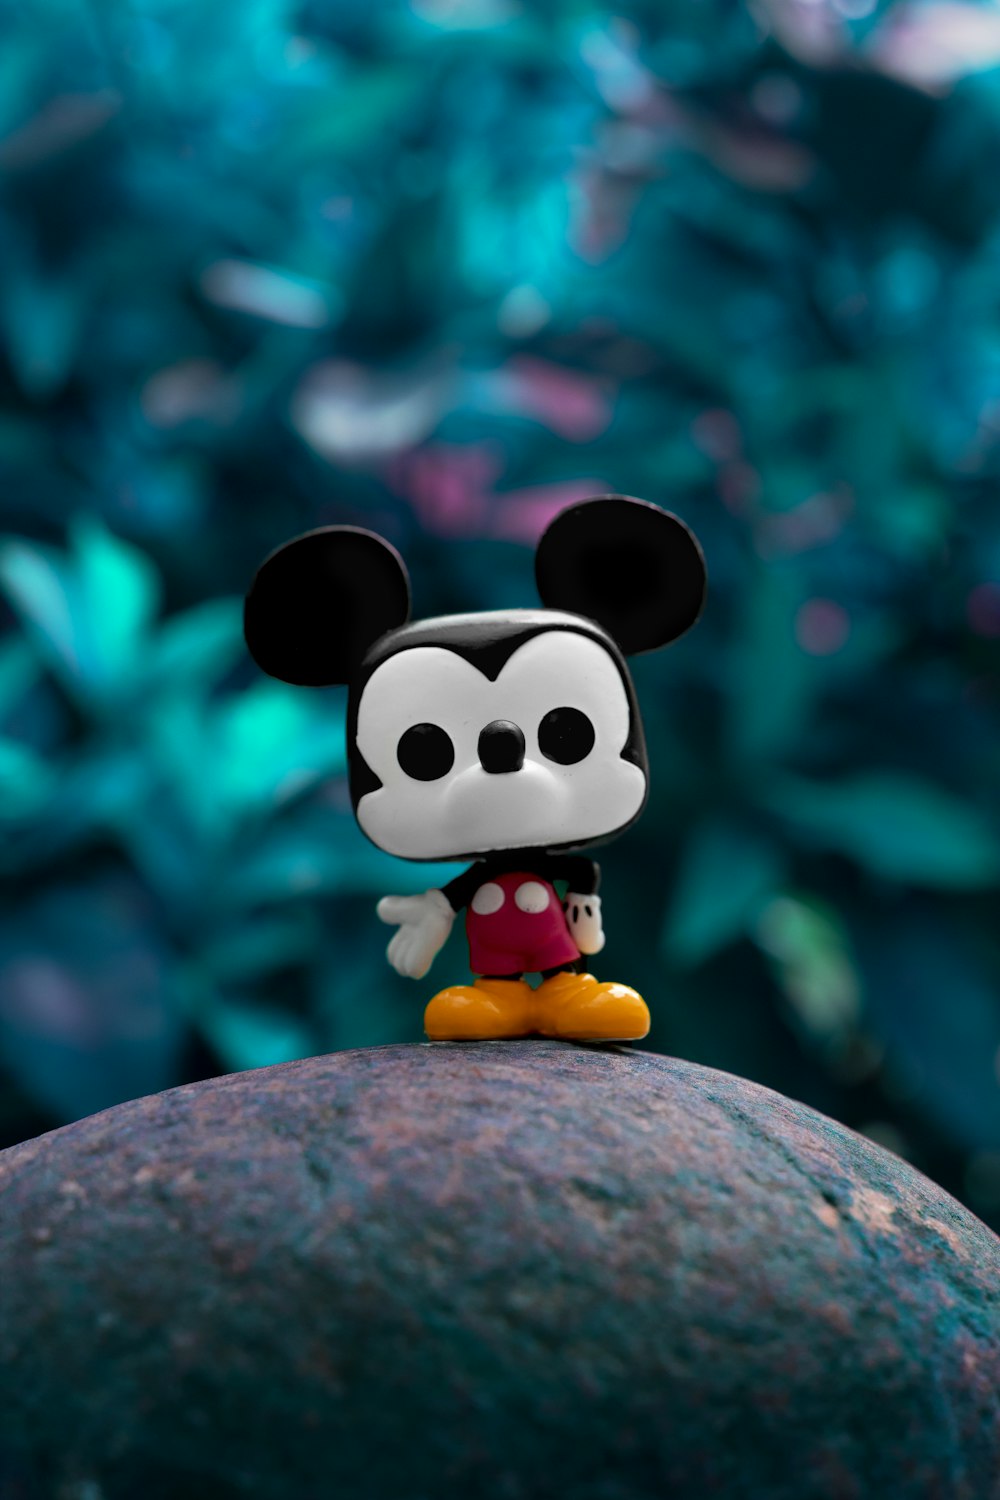 mickey mouse plush toy on gray rock